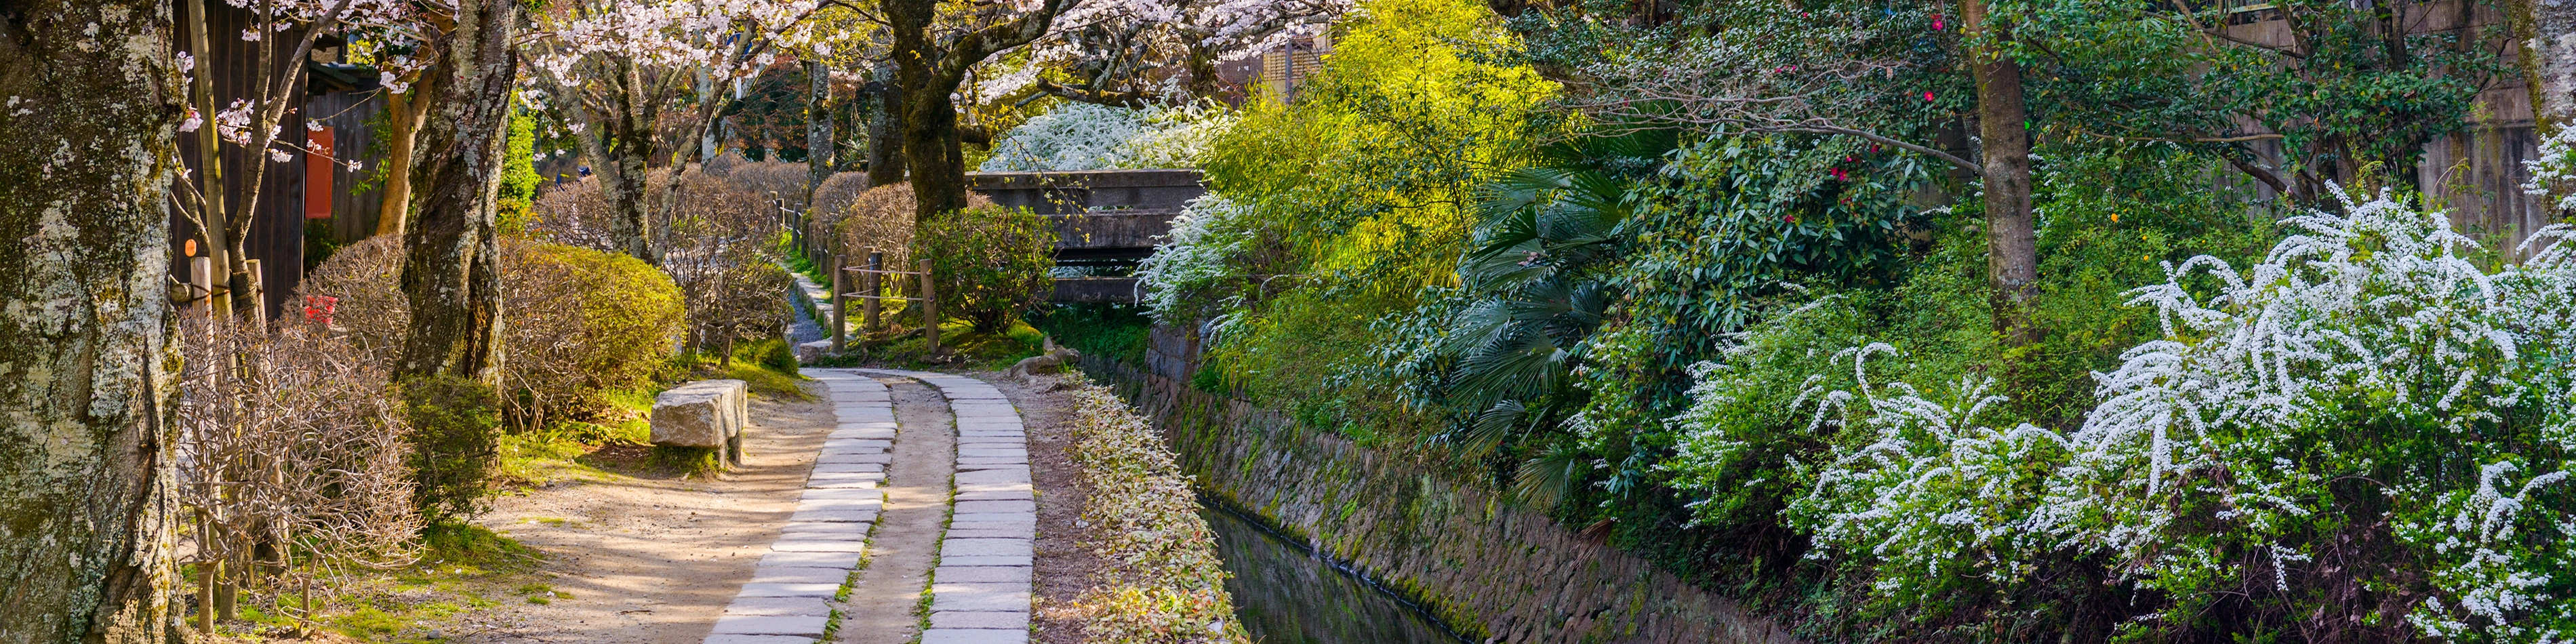 Philosopher's Walk in Kyoto, Japan - a scenic pedestrian path that follows a cherry tree-lined canal, offering beautiful views of nature and historic temples.